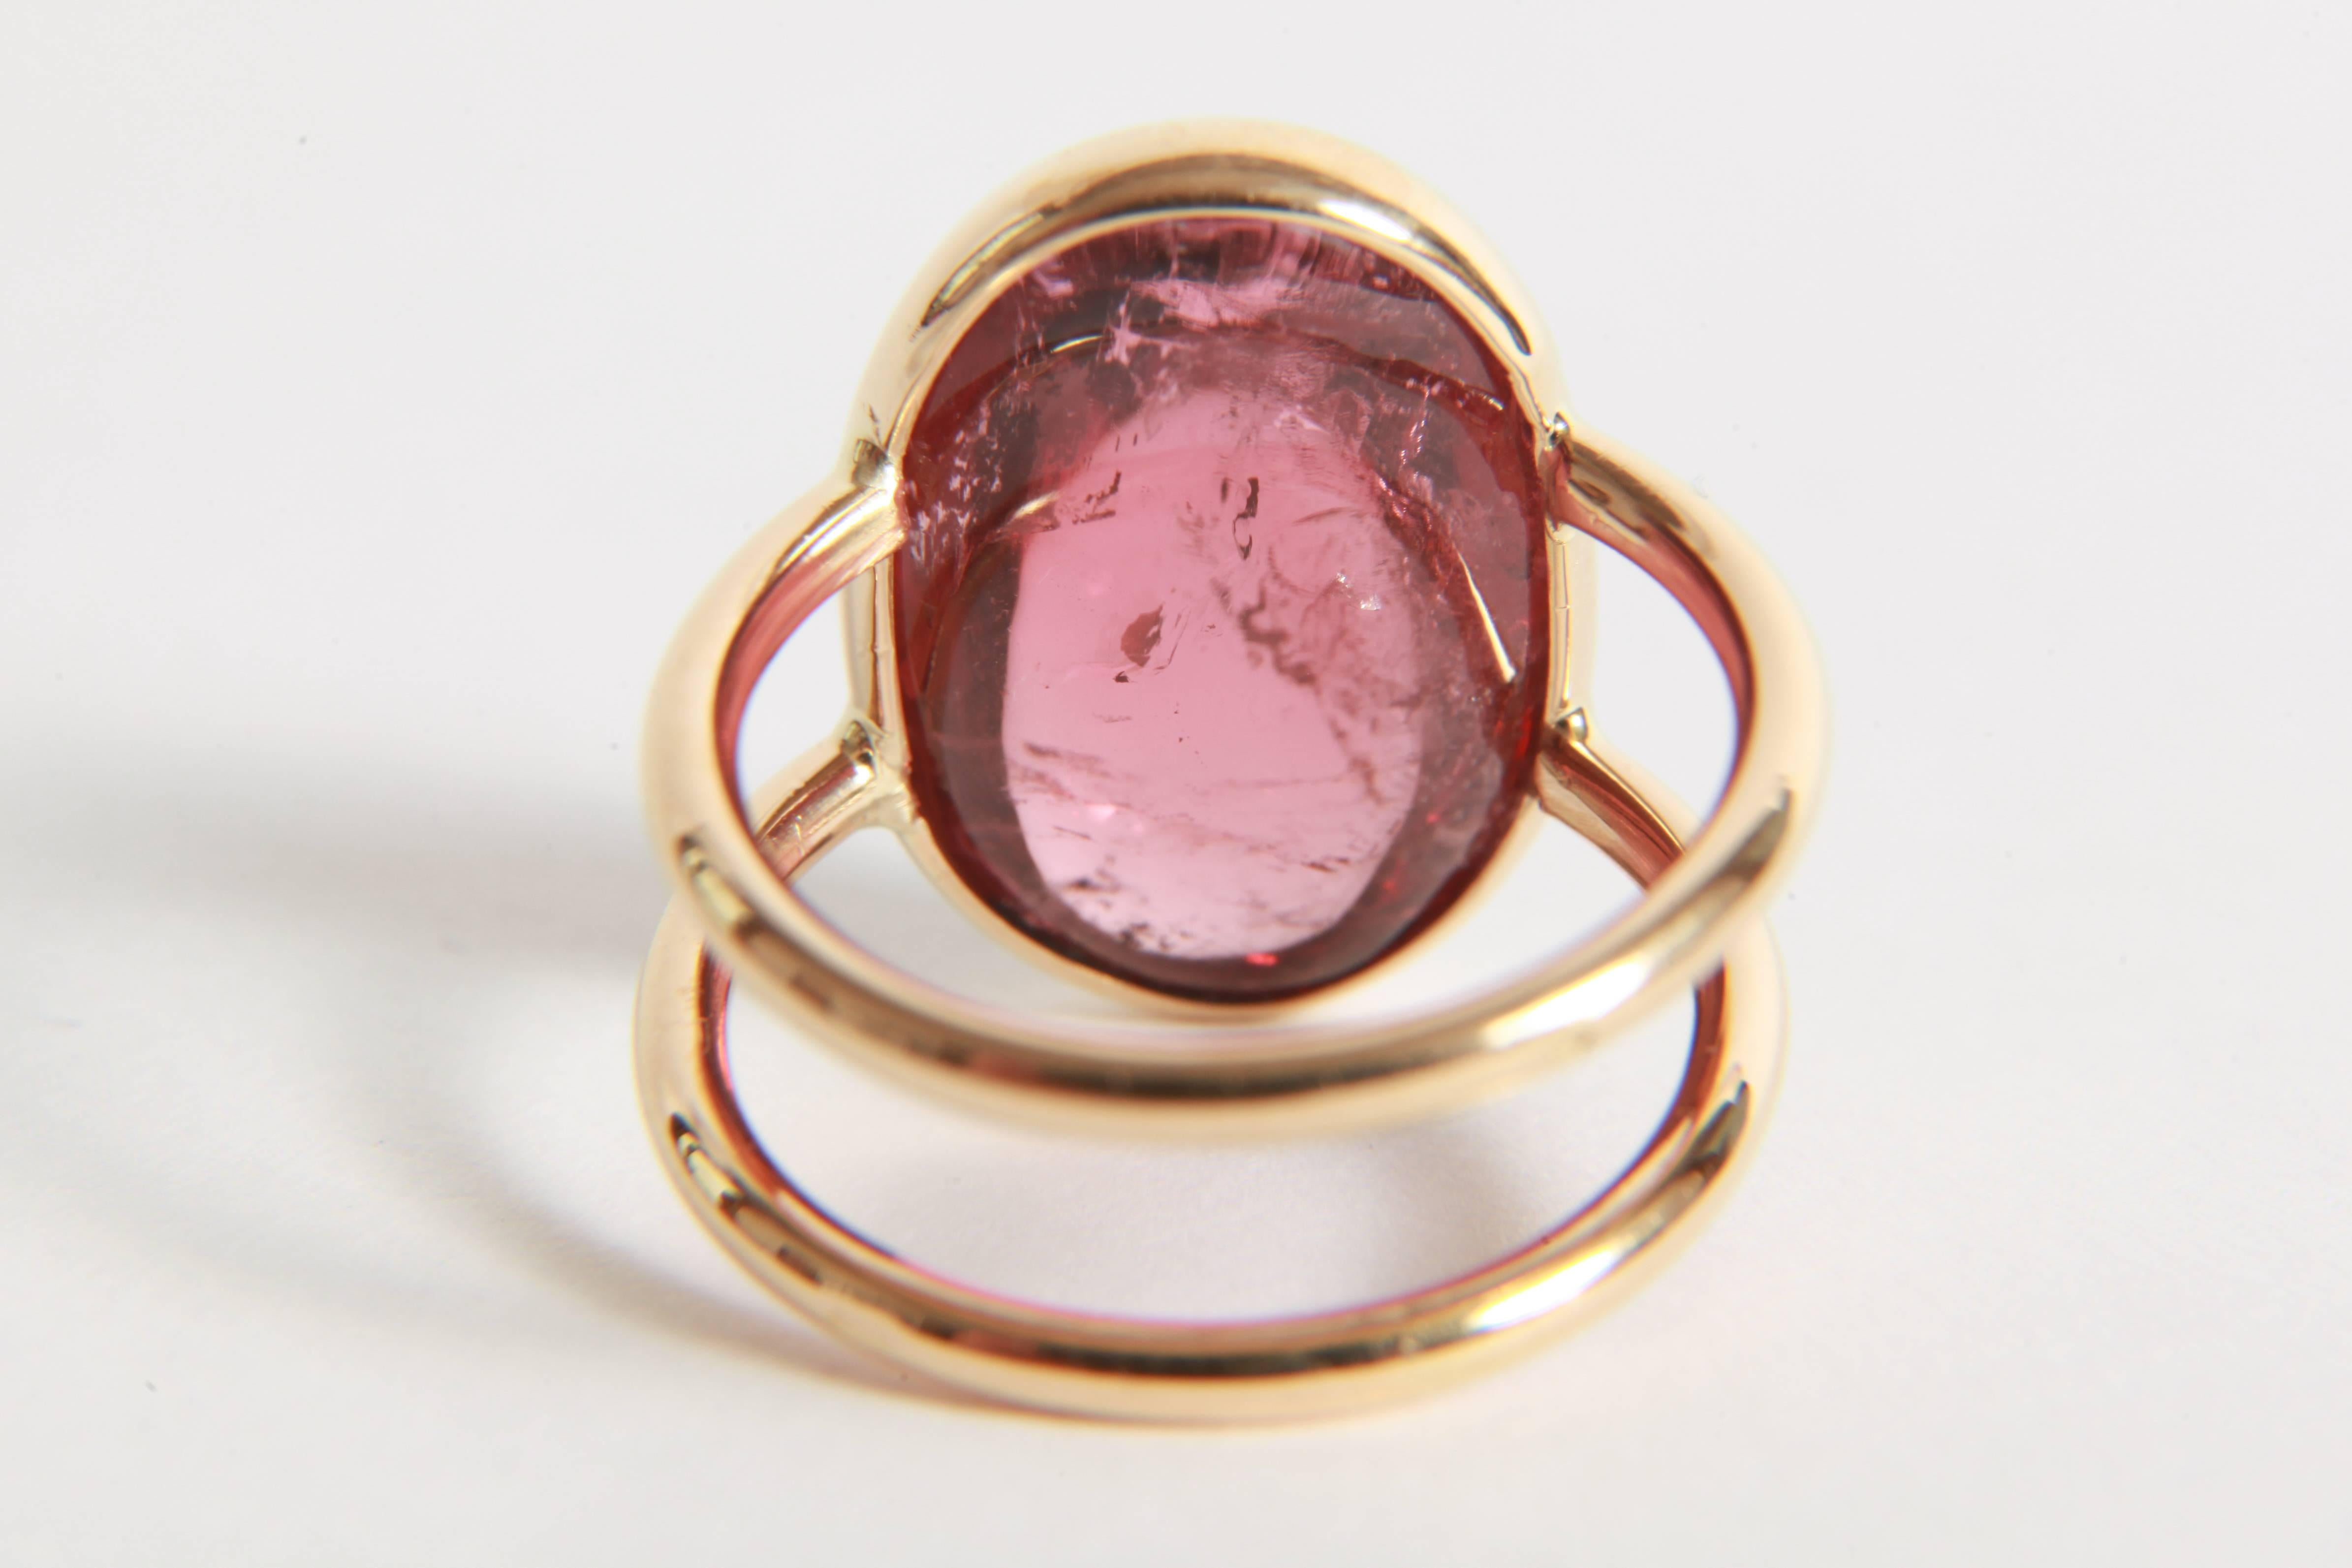 Contemporary 18K Yellow Gold Ring Set with a Pink Tourmaline Cabochon by Marion Jeantet